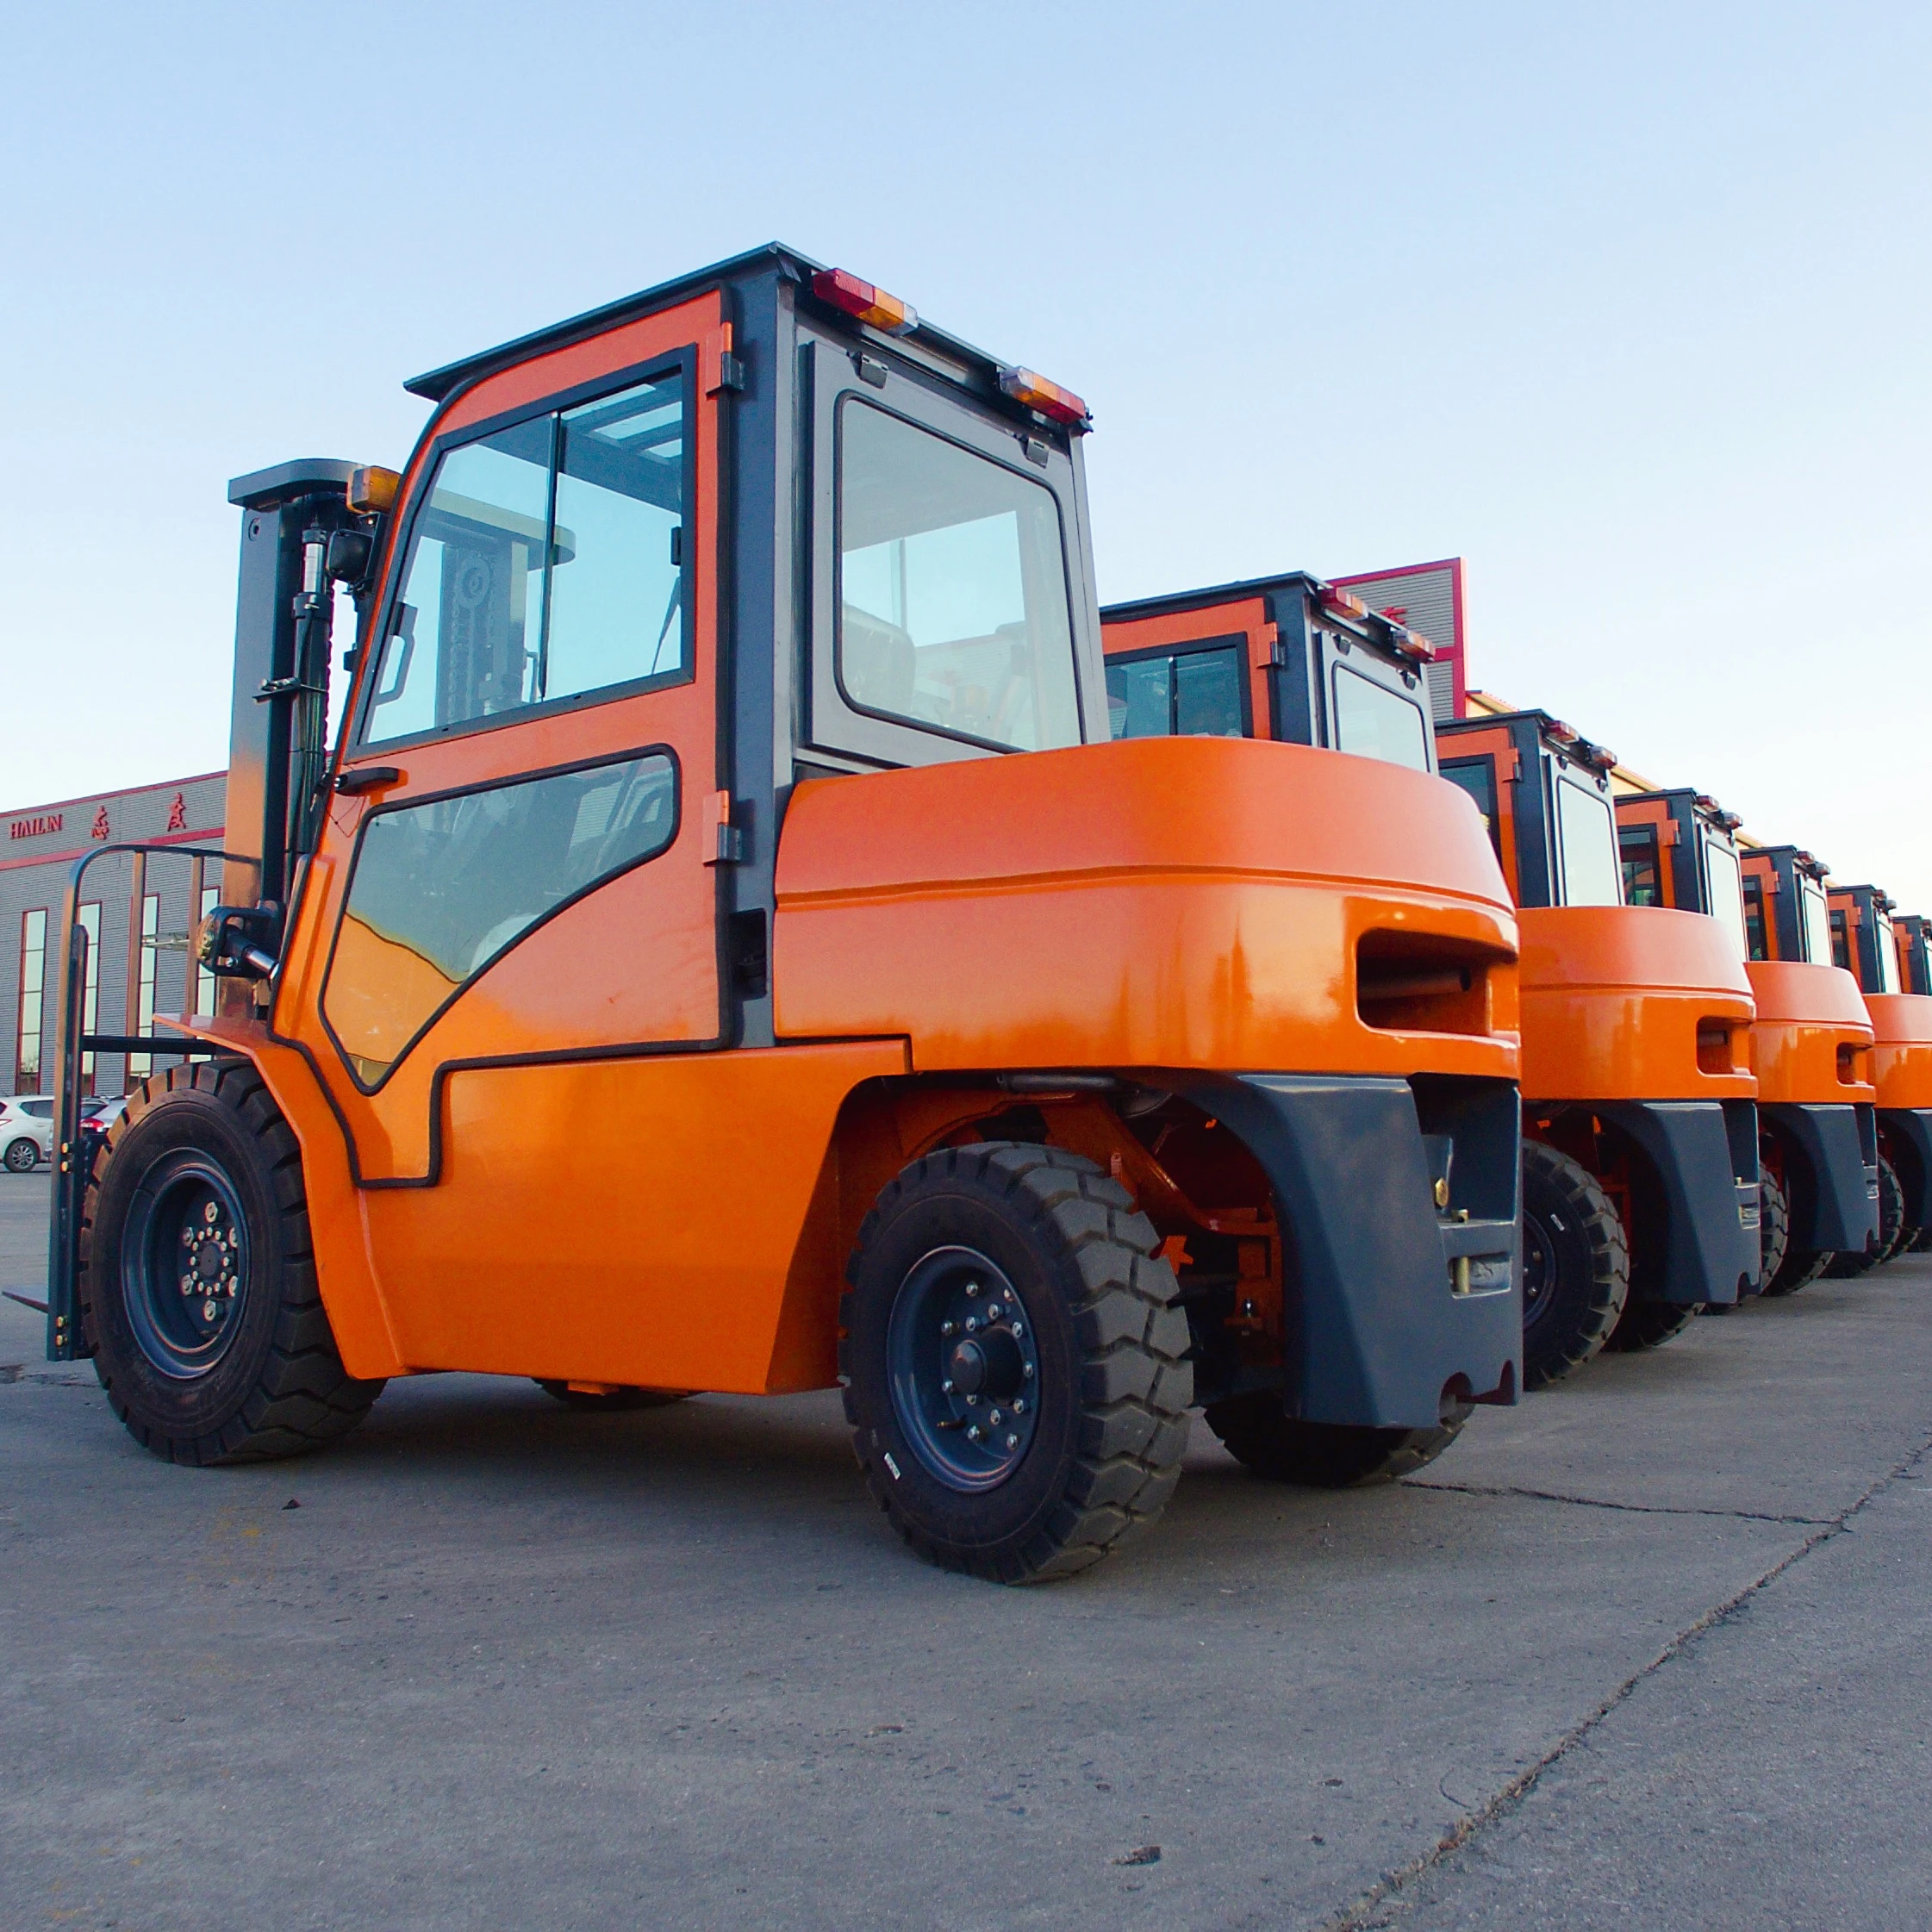 

HUAYA new 4 direction cpc50 5 7 tonne forklift 4d diesel 5 ton crawler hydraulic diesel forklift with attaments